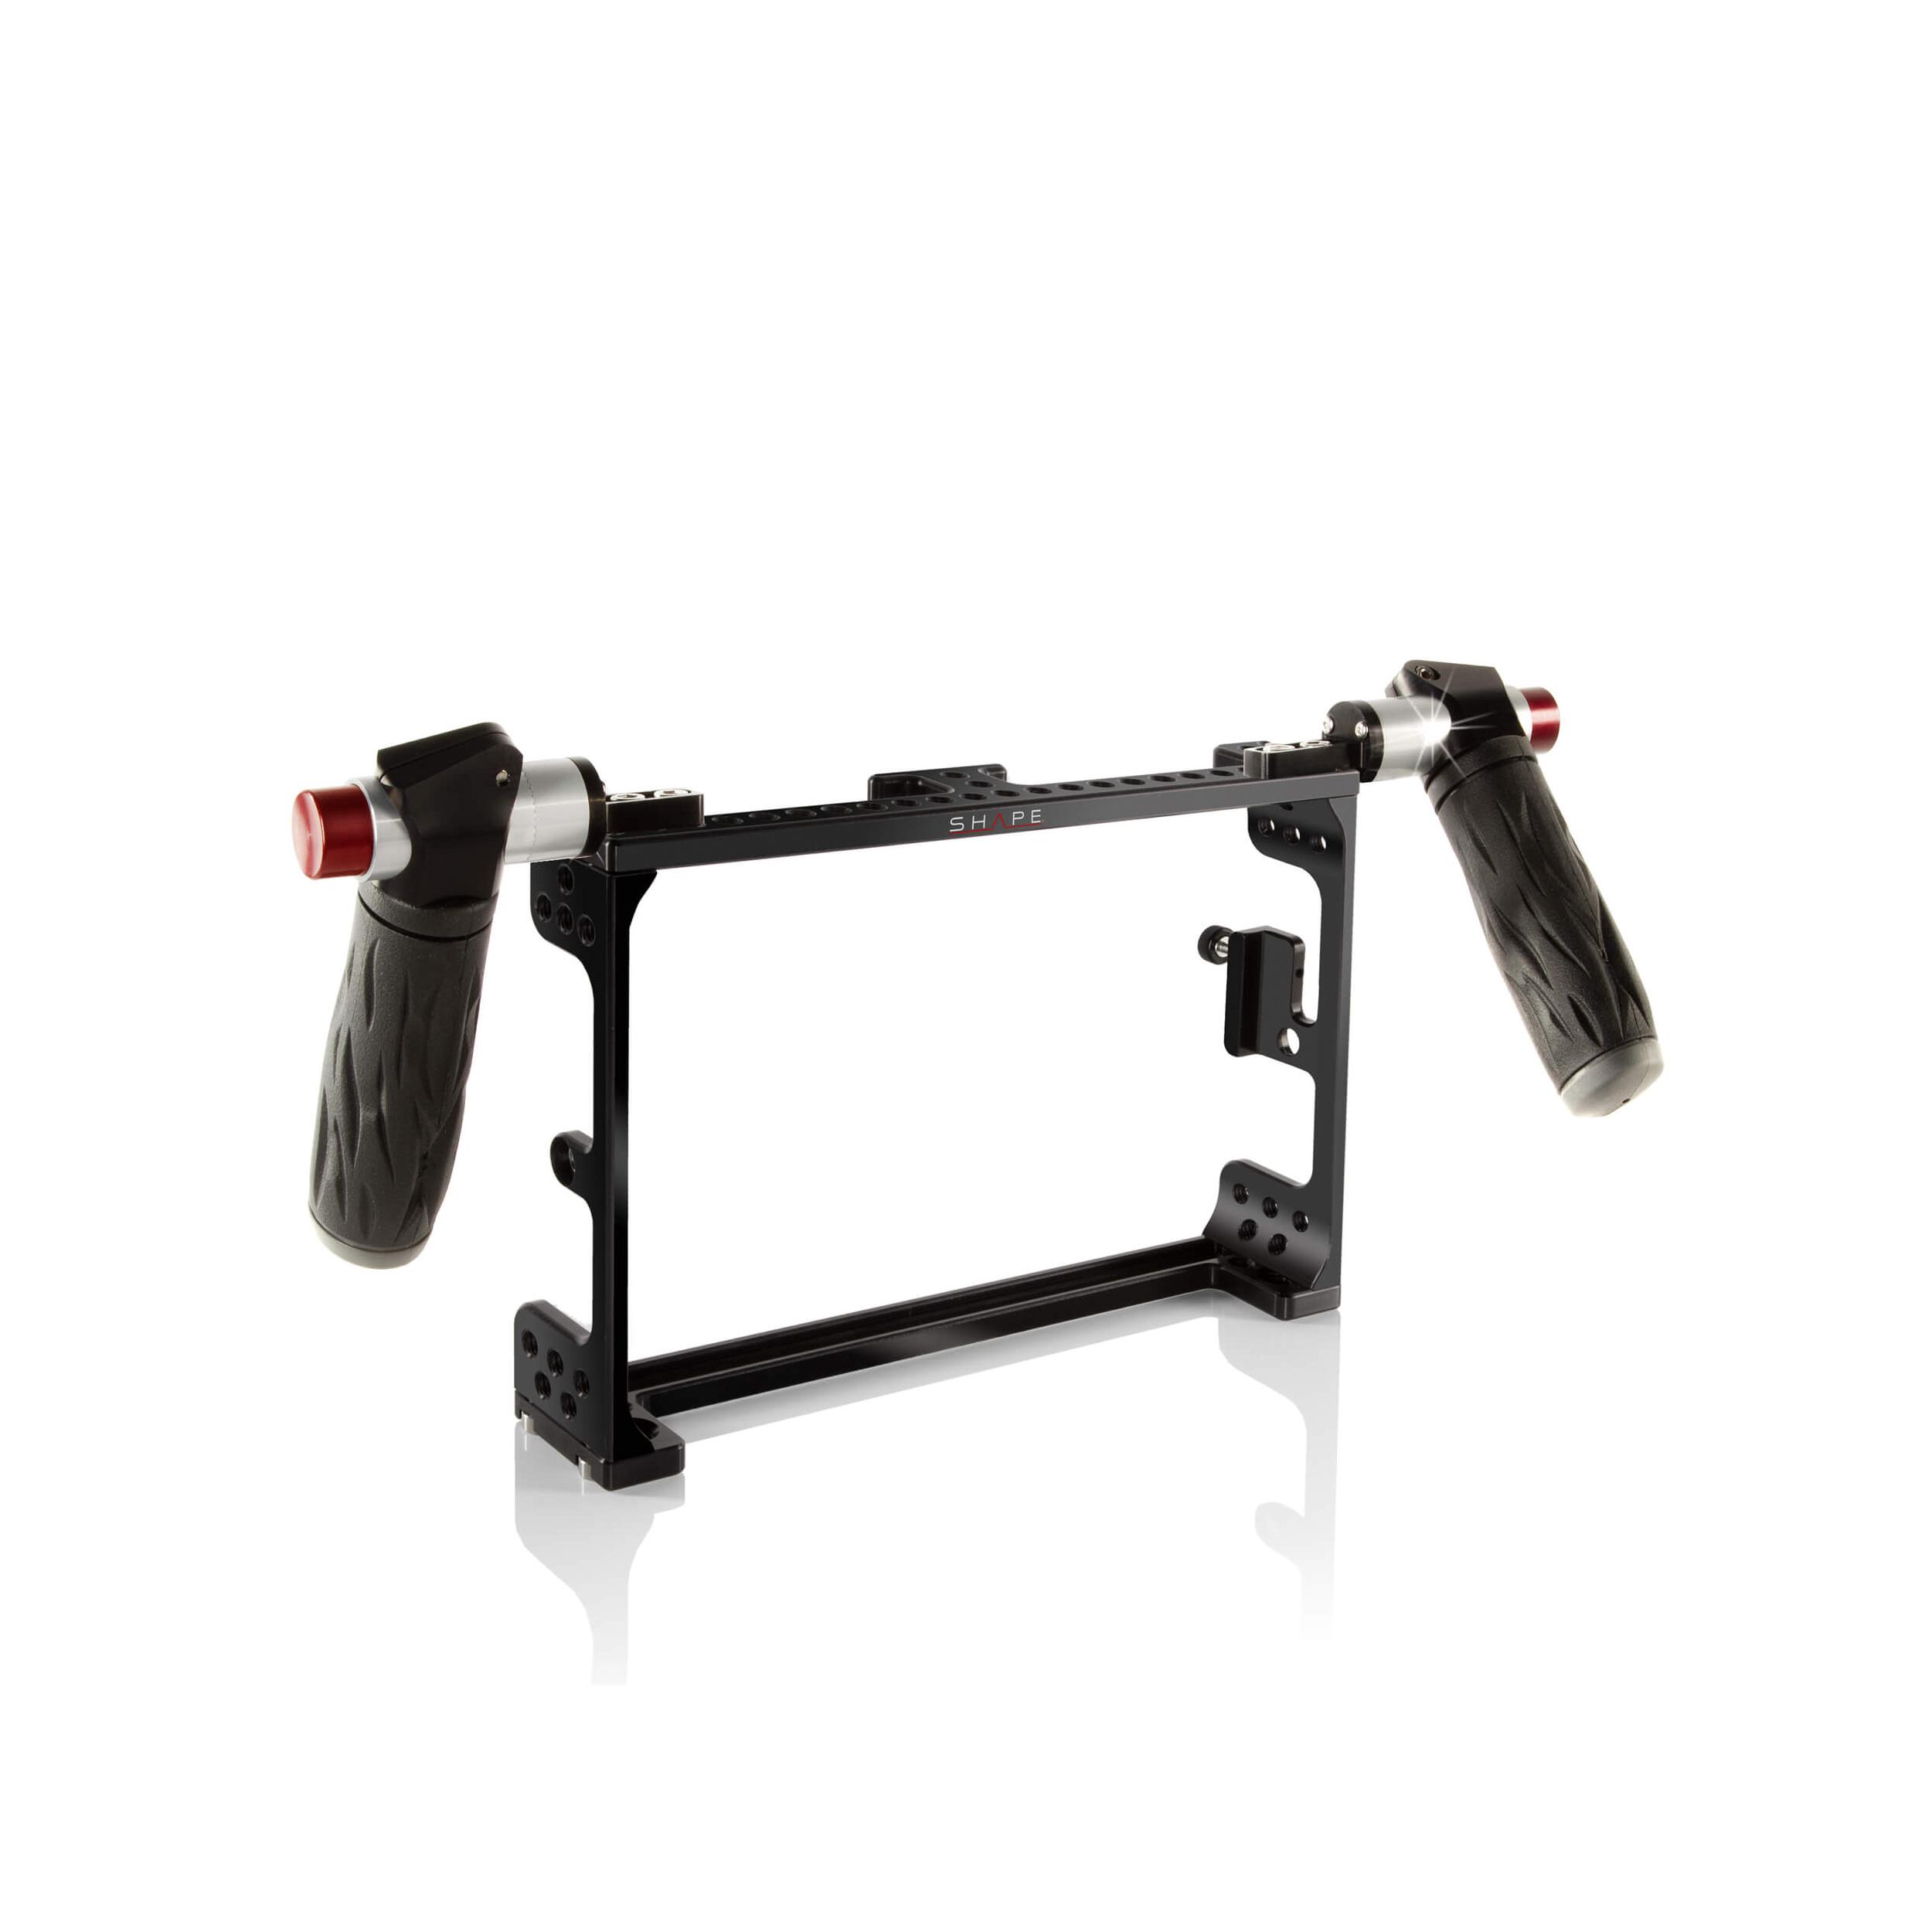 SHAPE Odyssey 7Q+ Monitor Cage Kit with Handles